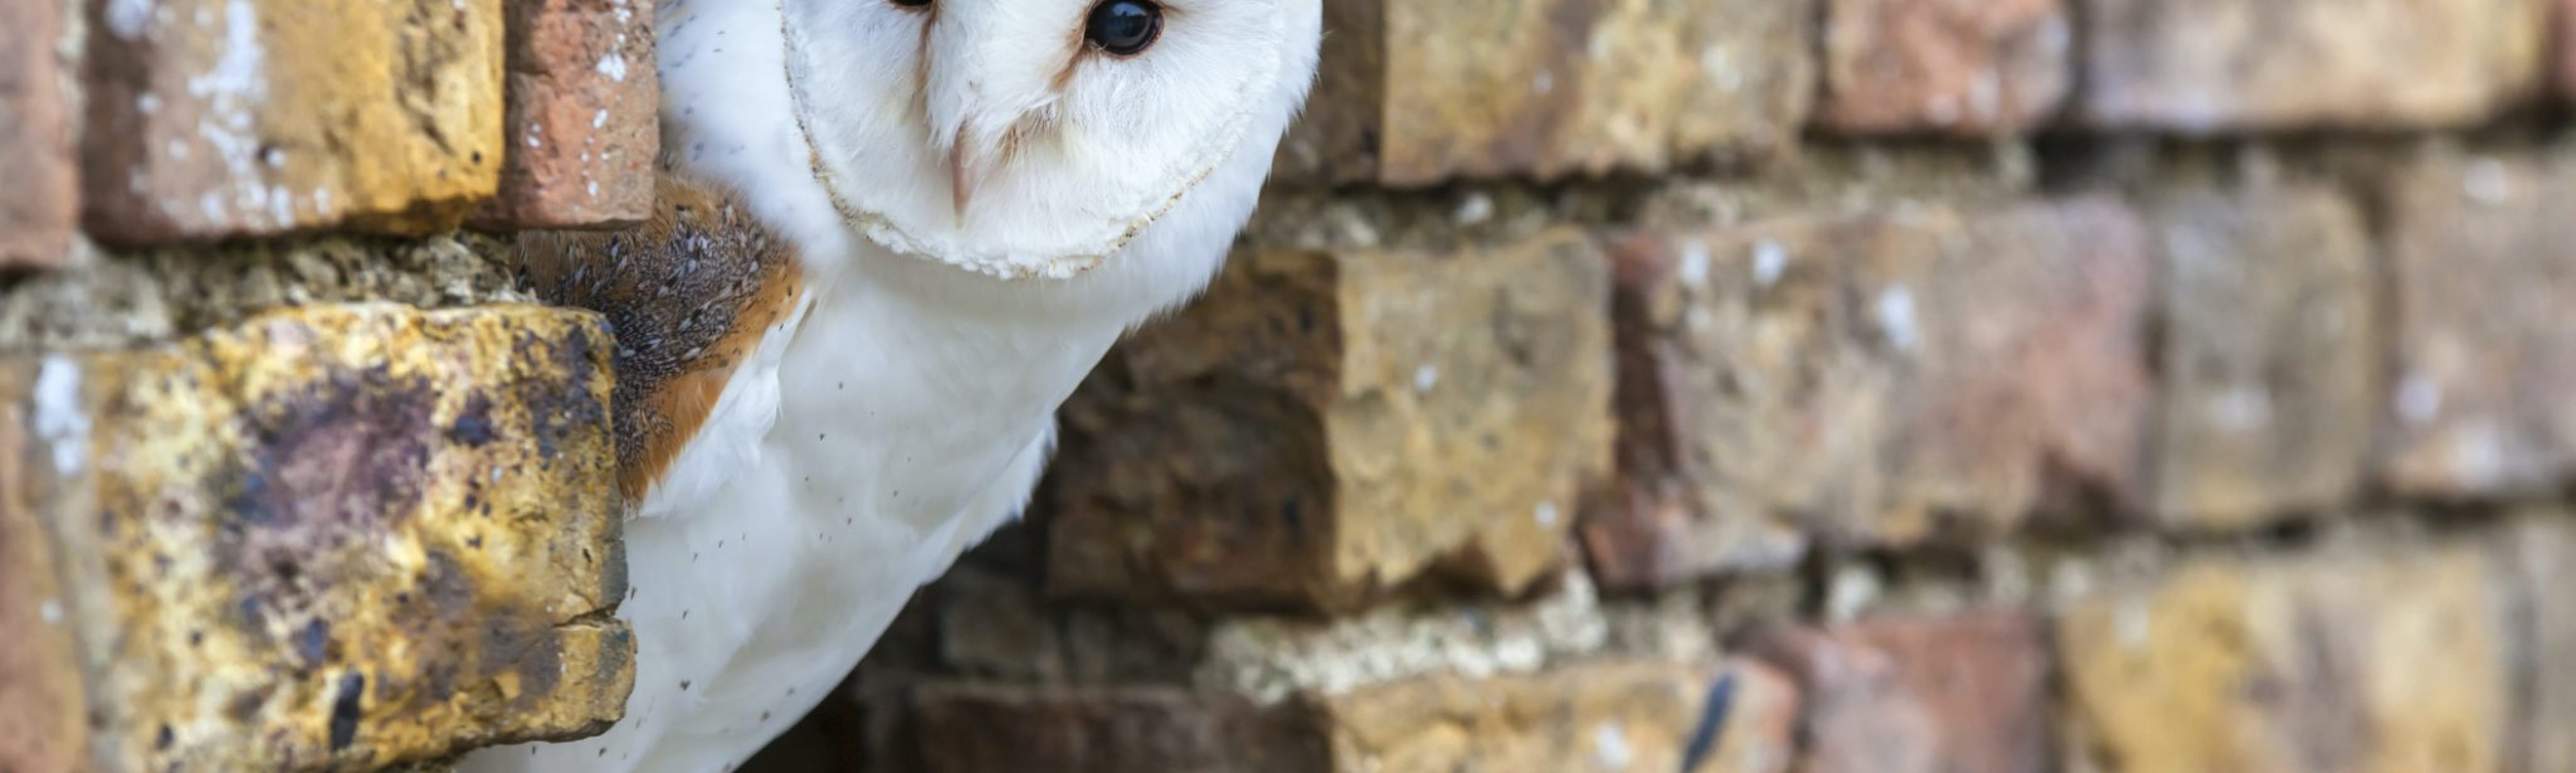 An owl peaking out of a bricked wall. Business Impact article image for feeling 'forgotten'? Seven steps to reclaim control of your future.